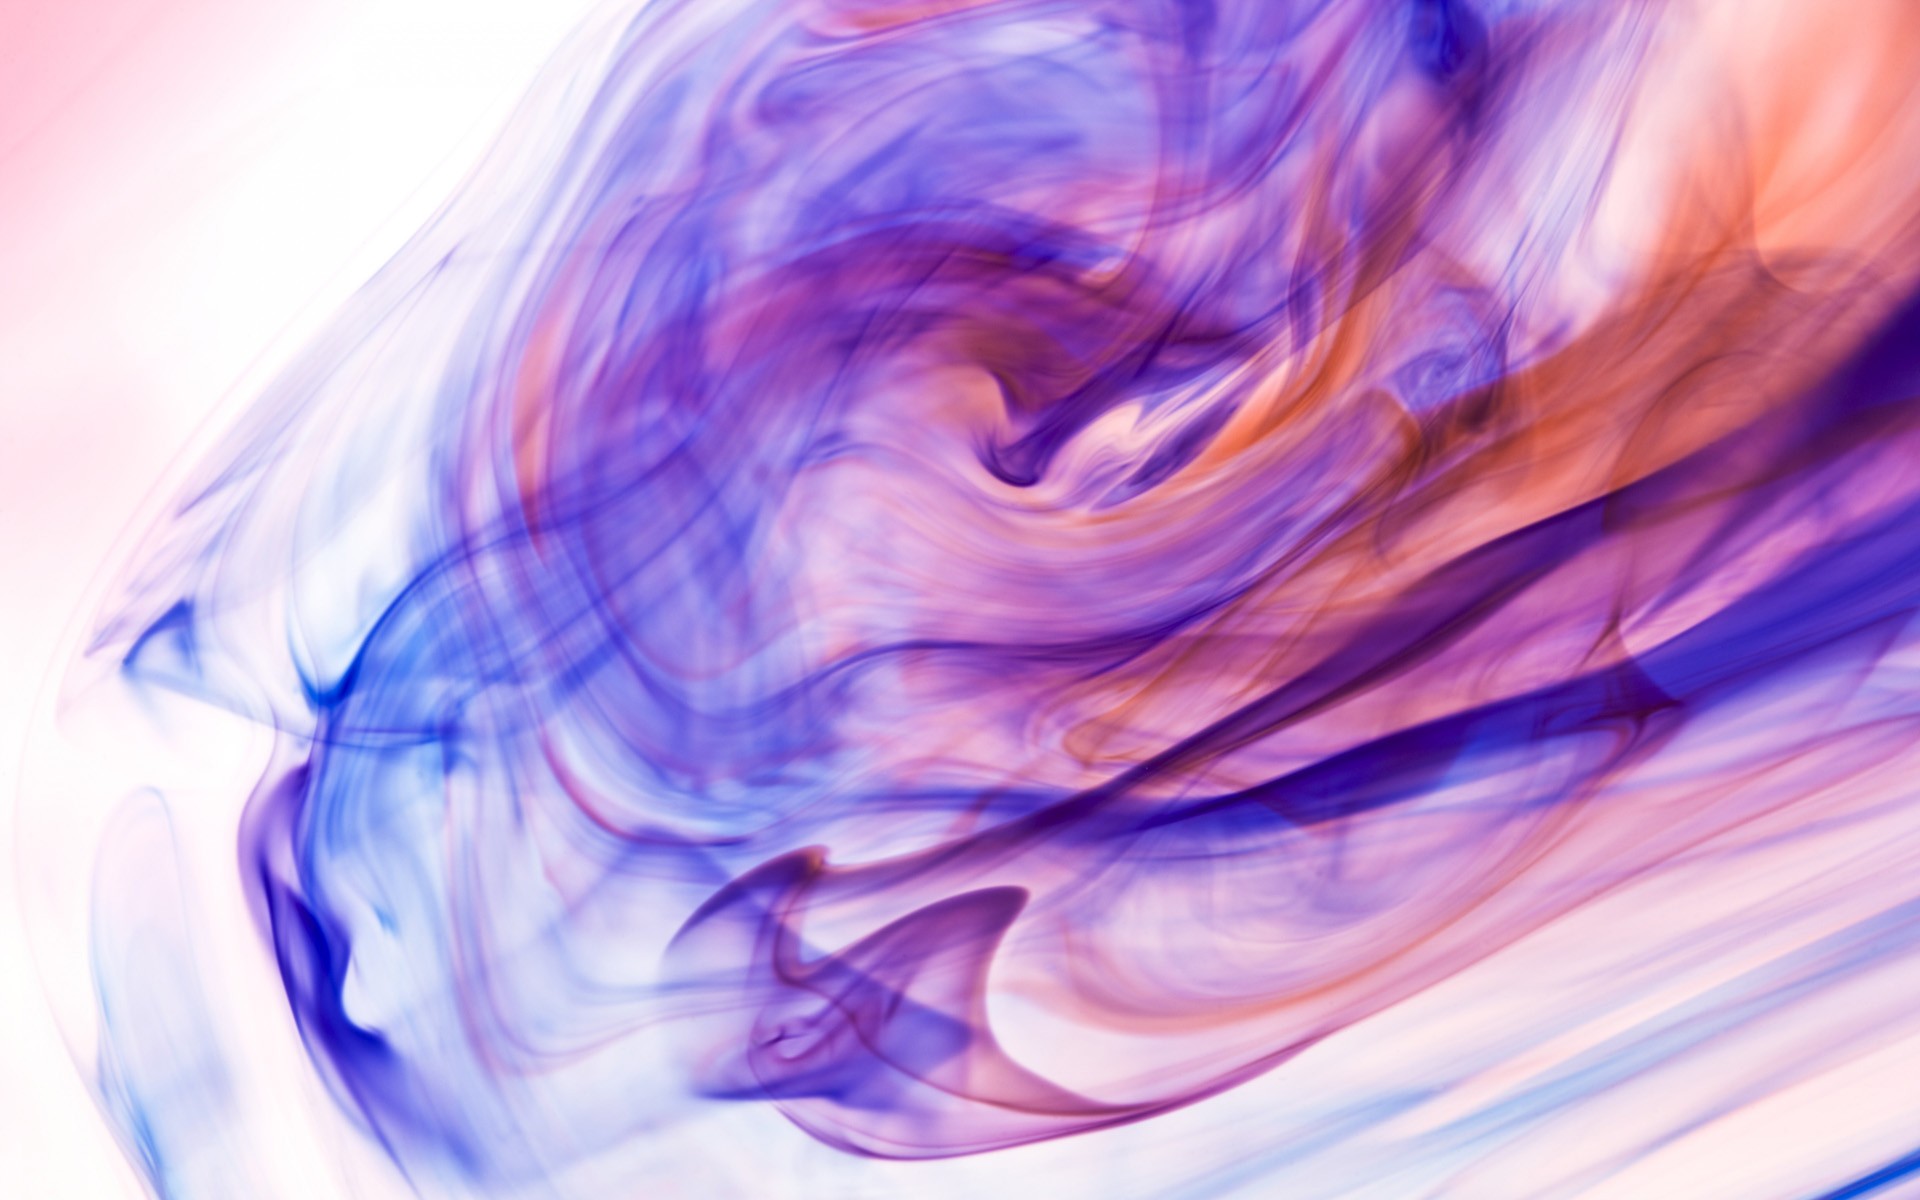 Paint In Water Ink Abstract Diffused Colorful 1920x1200